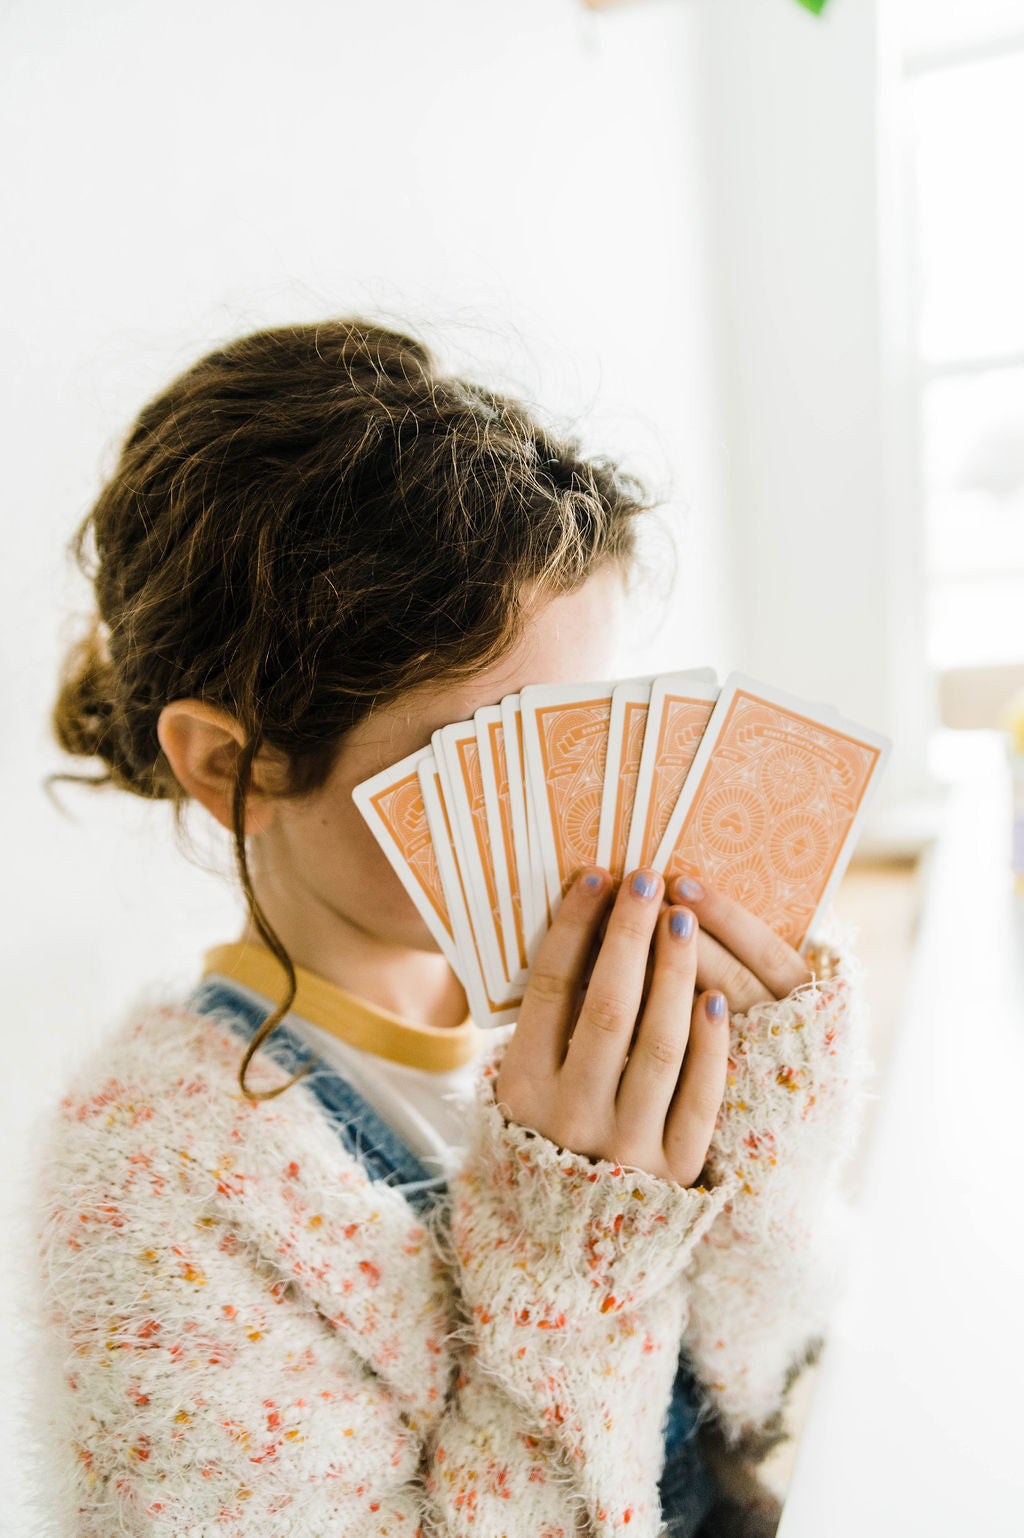 ivory | playing cards